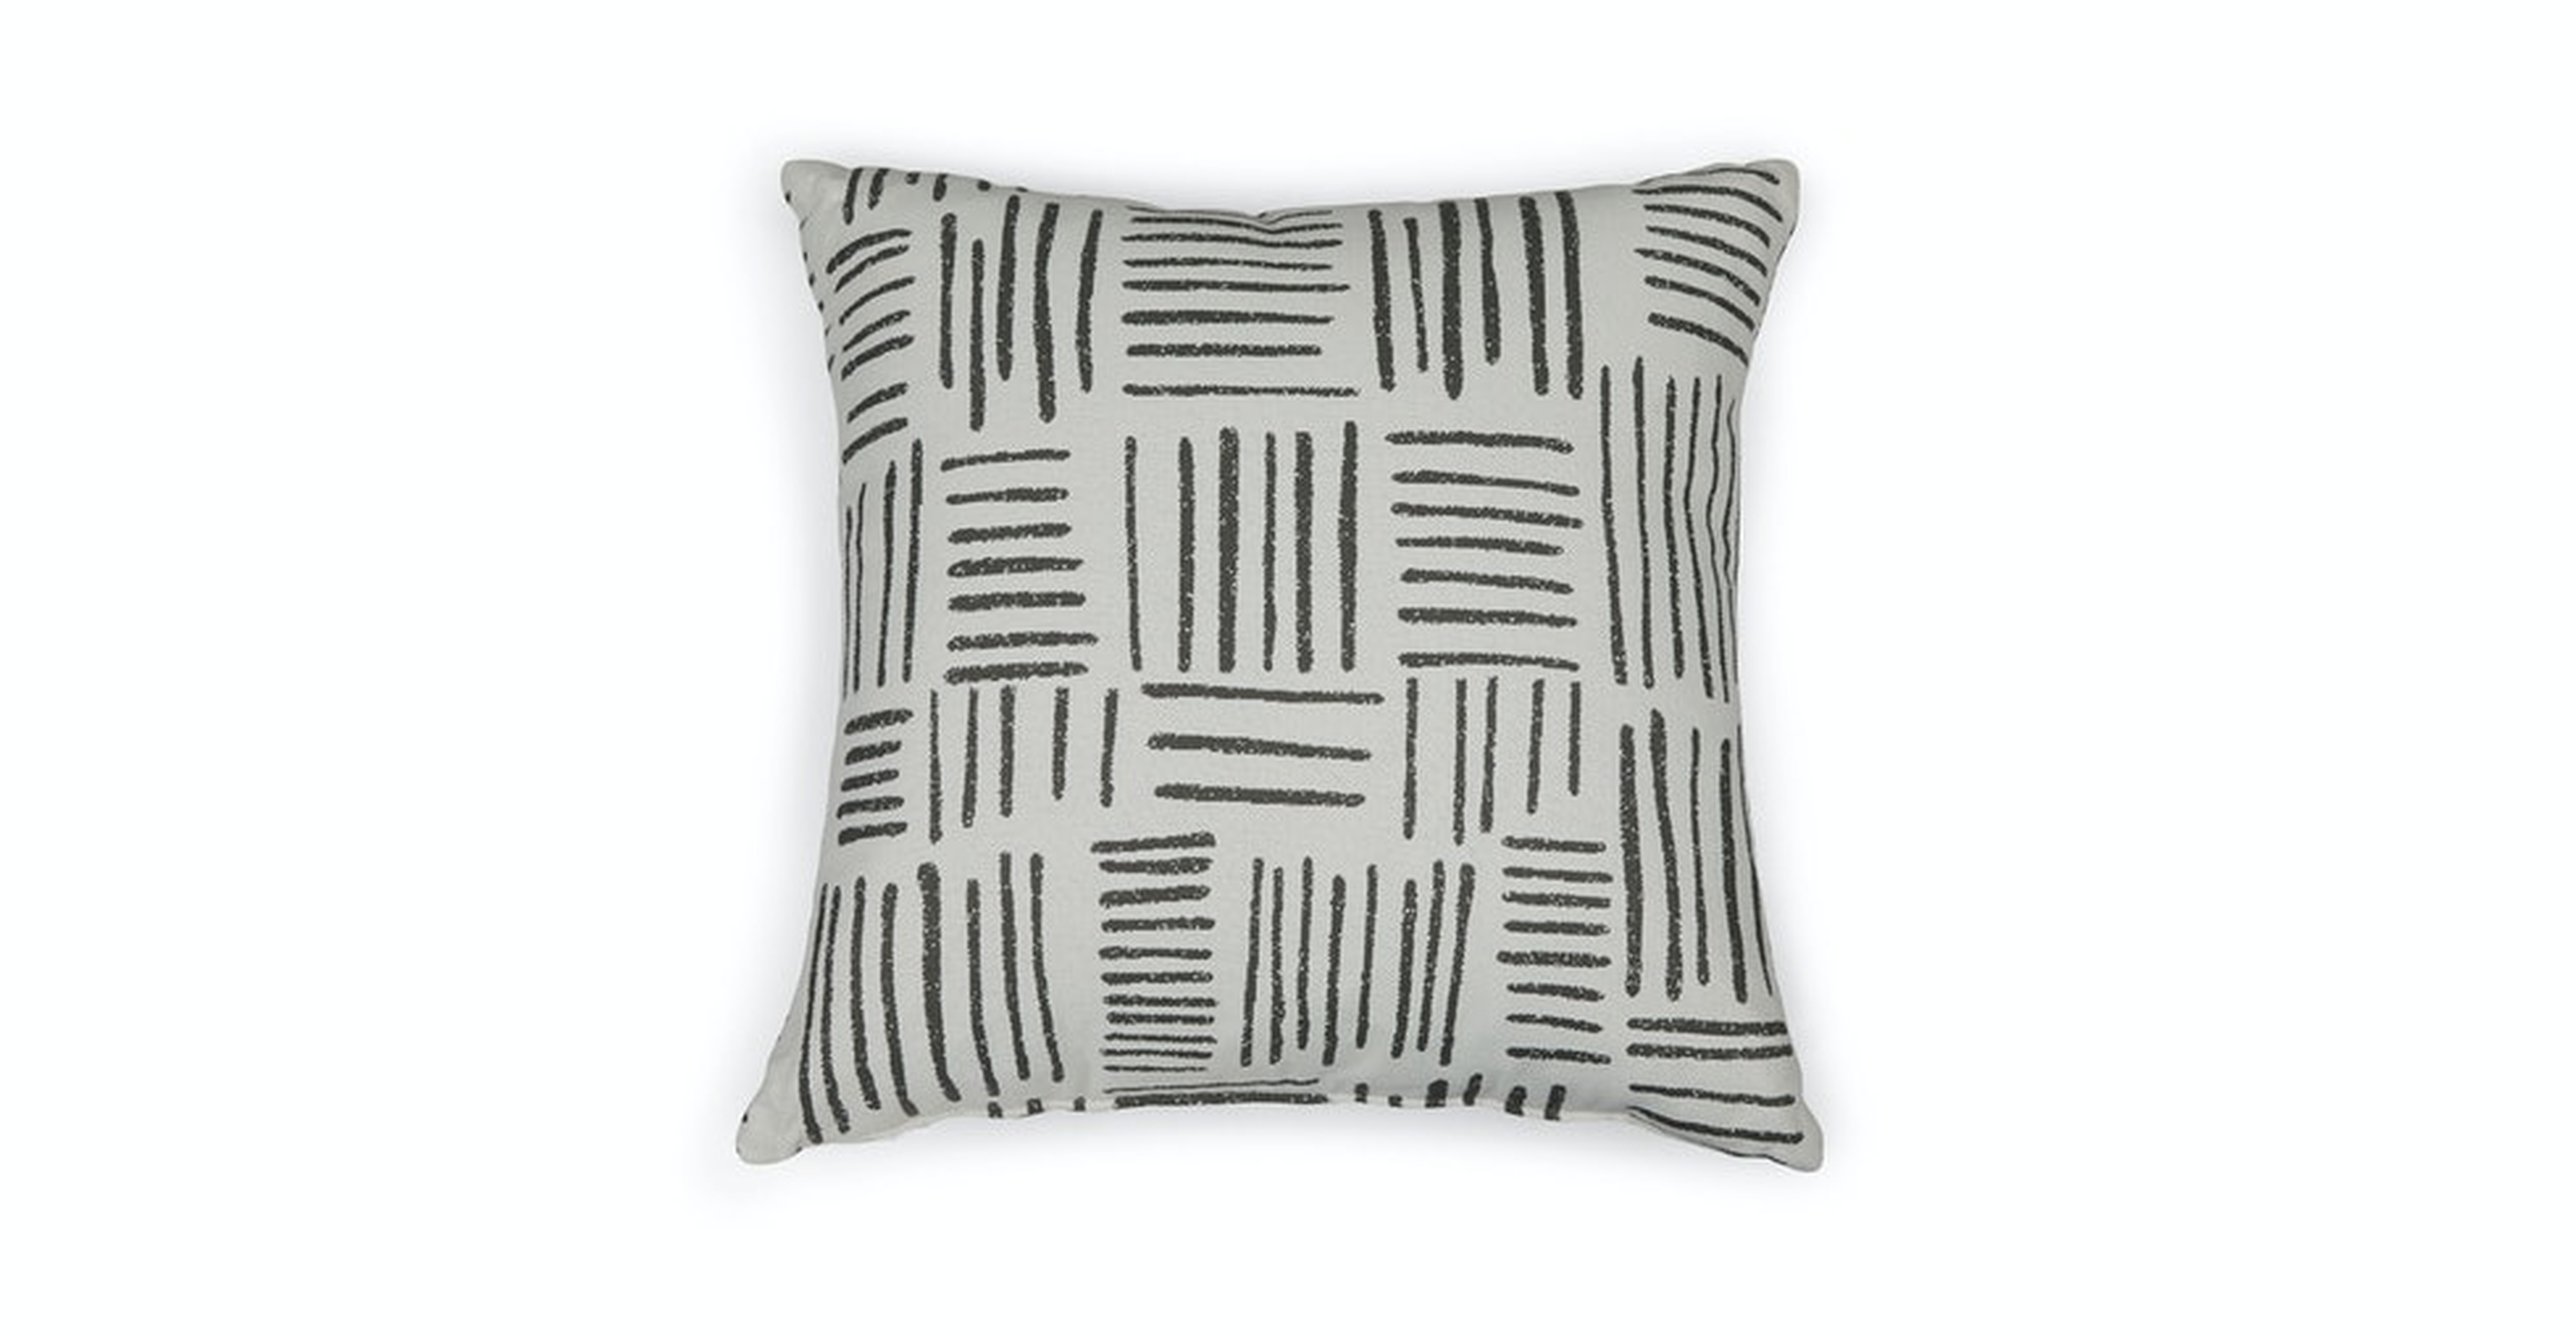 Rooth Jacquard Gray Indoor/Outdoor Pillow - Article